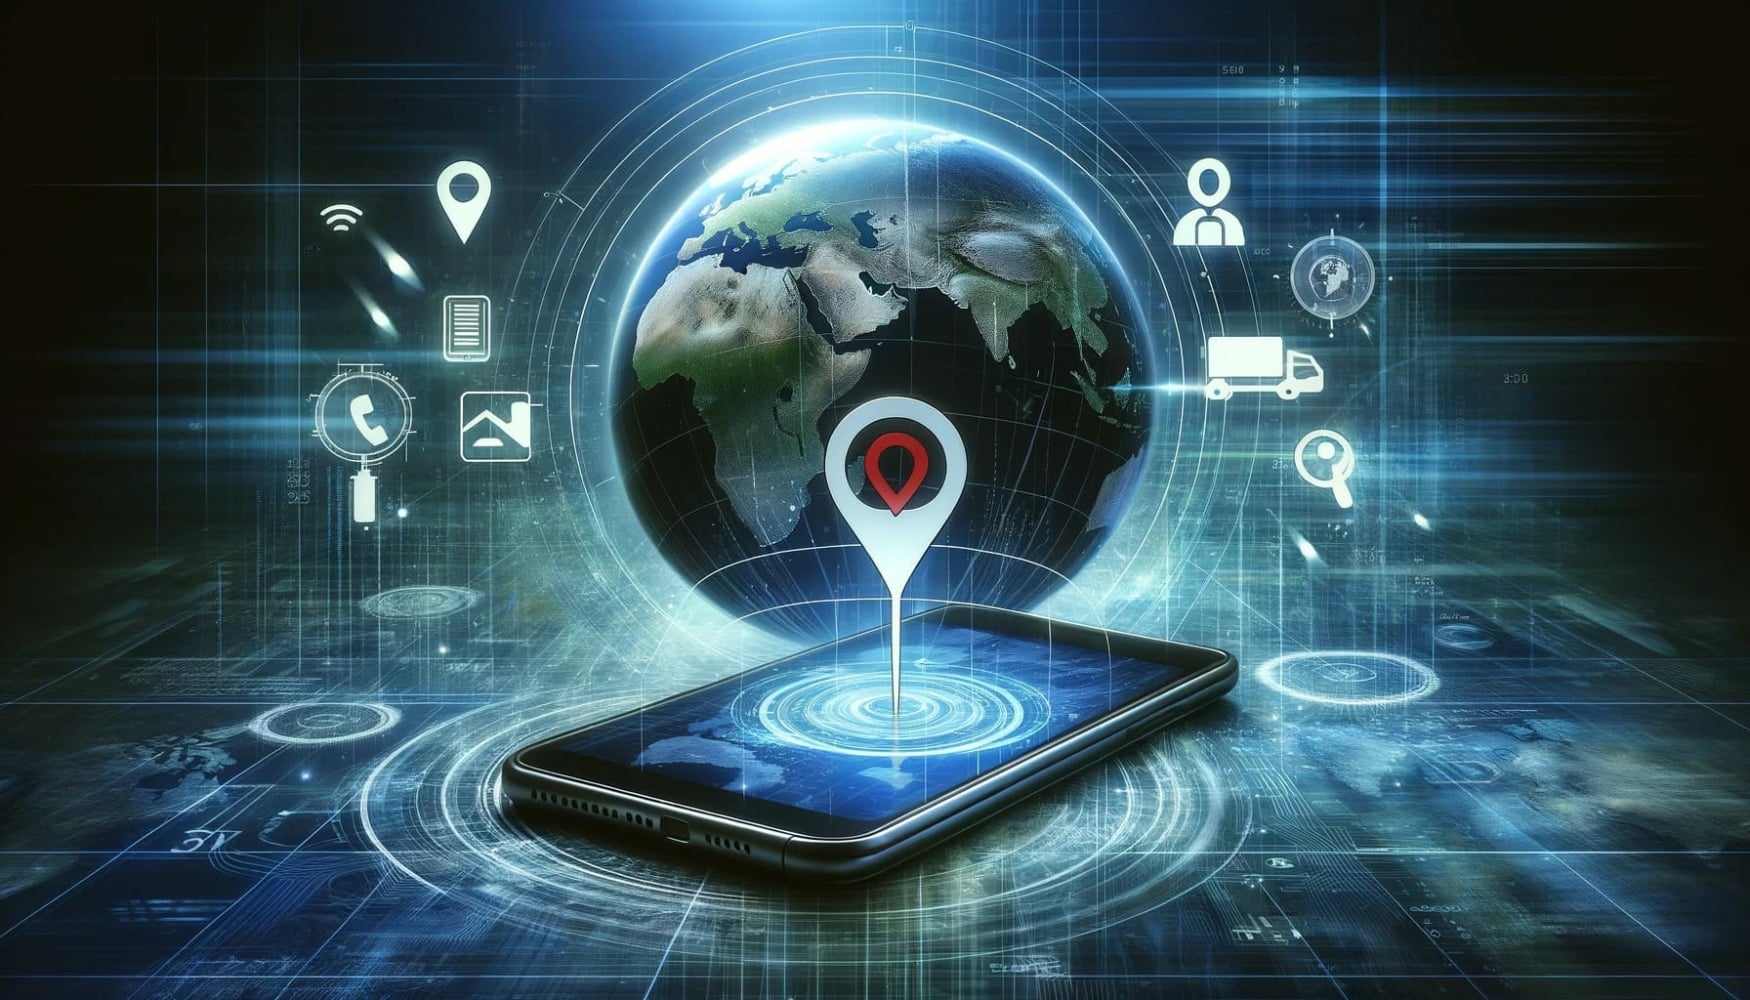 An abstract conceptual image representing the theme of tracking a phone location by typing in the number. The artwork include a digital globe showing various continents, symbolizing global reach. In the foreground, a smartphone displaying a map application with a pin icon indicating a location. Surrounding the phone, various symbols like a magnifying glass, question mark, and location markers should be present, illustrating the concept of searching and locating. The image has a sense of technology, investigation, and global connectivity, without including any personal information or specific phone numbers.